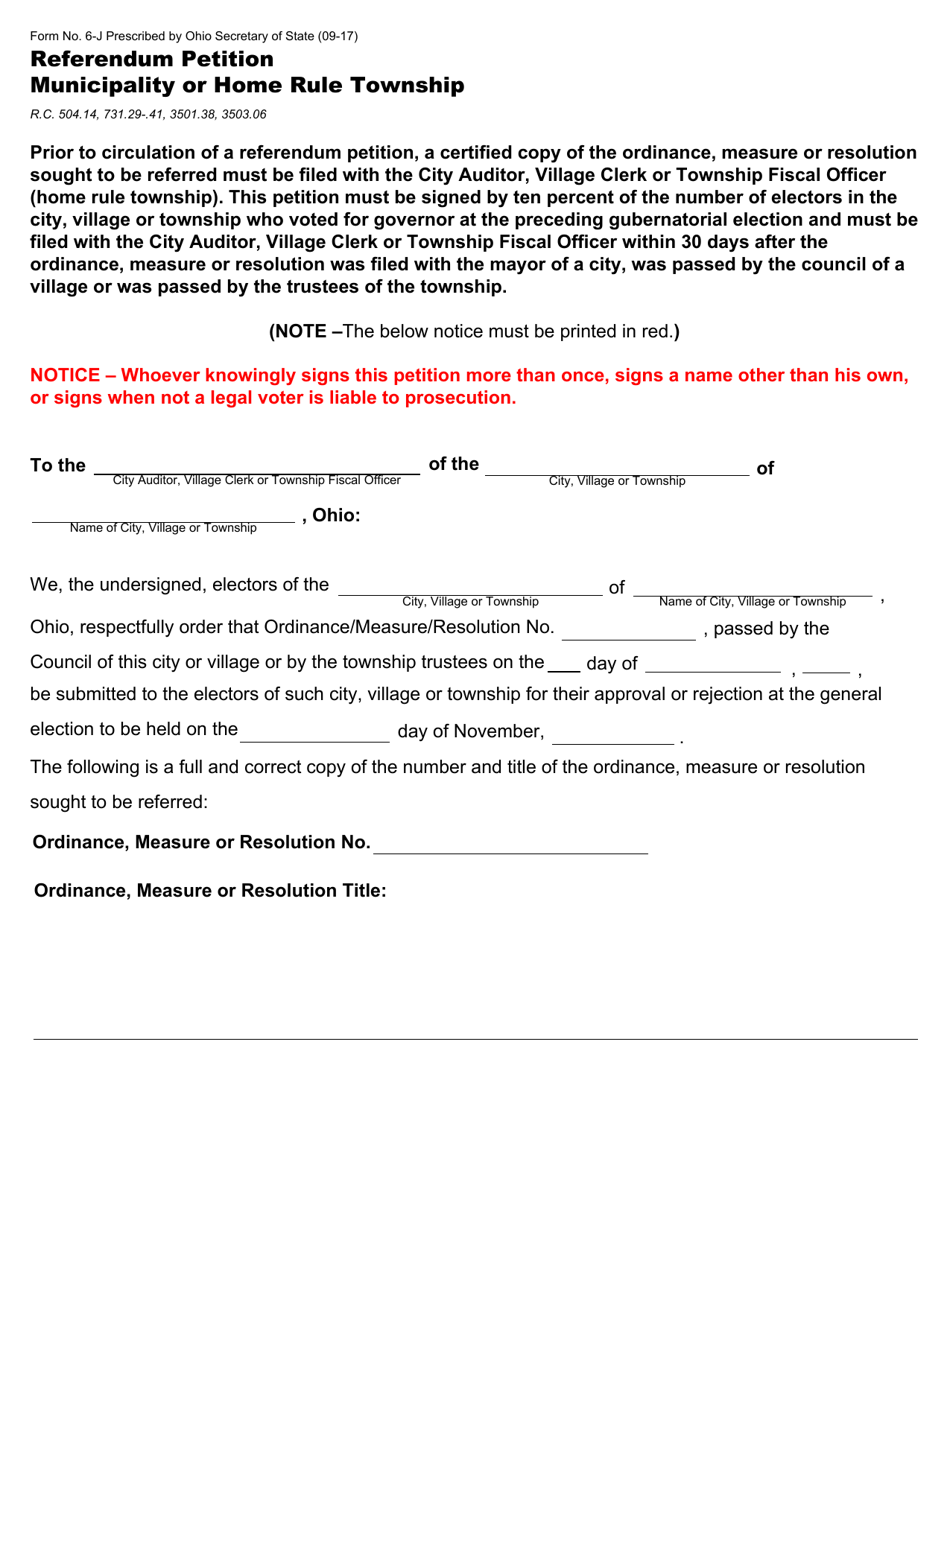 Form 6-J Referendum Petition Municipality or Home Rule Township - Ohio, Page 1